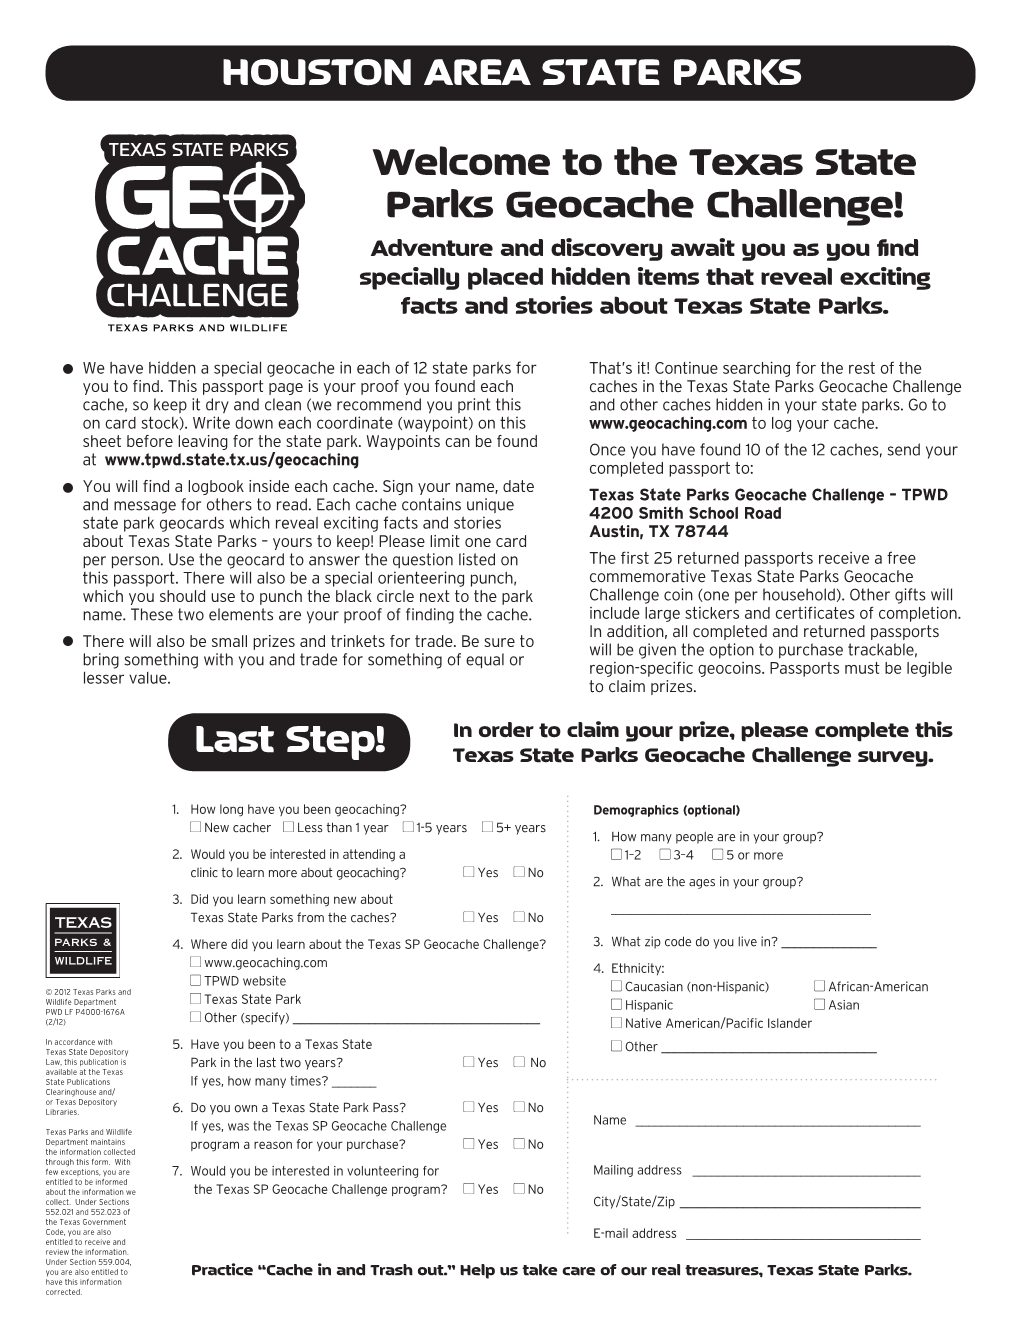 The Texas State Parks Geocache Challenge! HOUSTON AREA